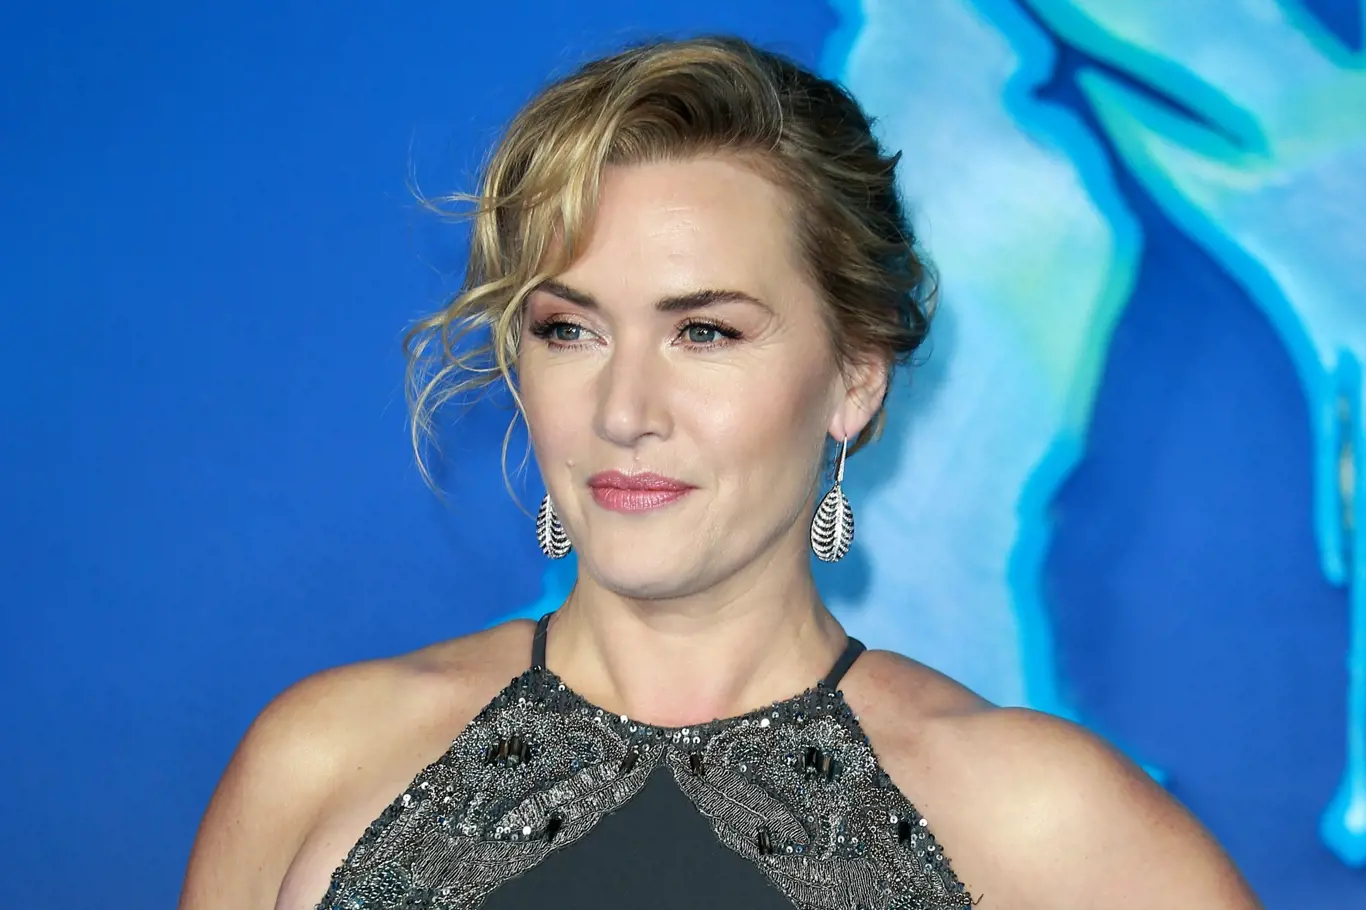 London, United Kingdom - December 06, 2022: Kate Winslet attends the "Avatar: The Way Of Water" World Premiere at Odeon Luxe Leicester Square, England.